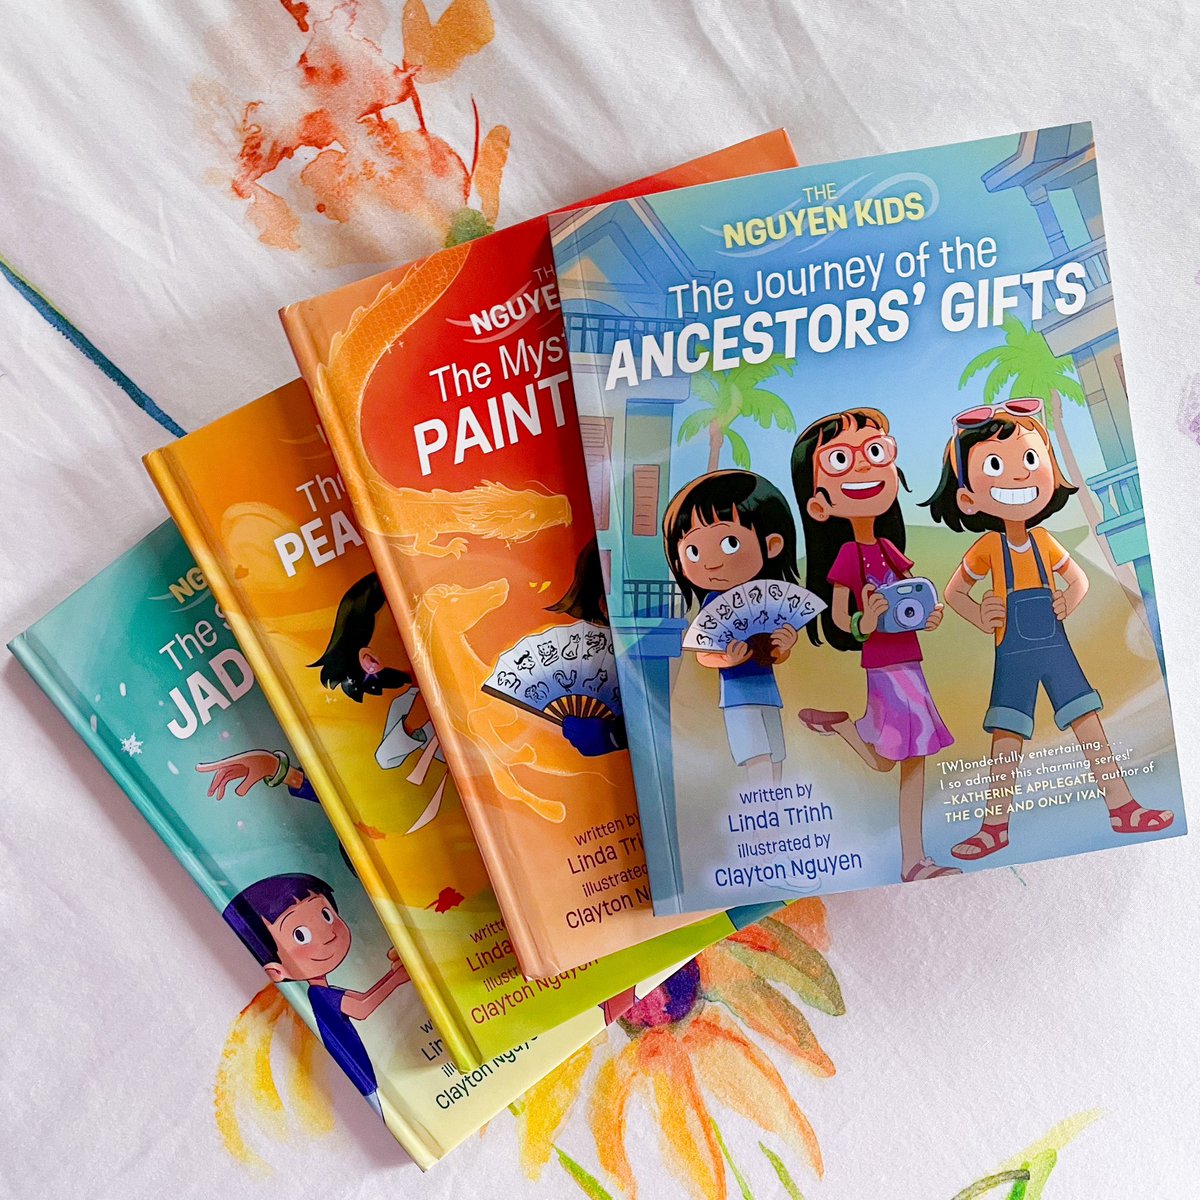 The latest installment in The Nguyen Kids series, The Journey of the Ancestors’ Gifts, is available now!🤩 Written by Linda Trinh and beautifully illustrated by Clayton Nguyen, this book takes the Nguyen kids on an exciting vacation.